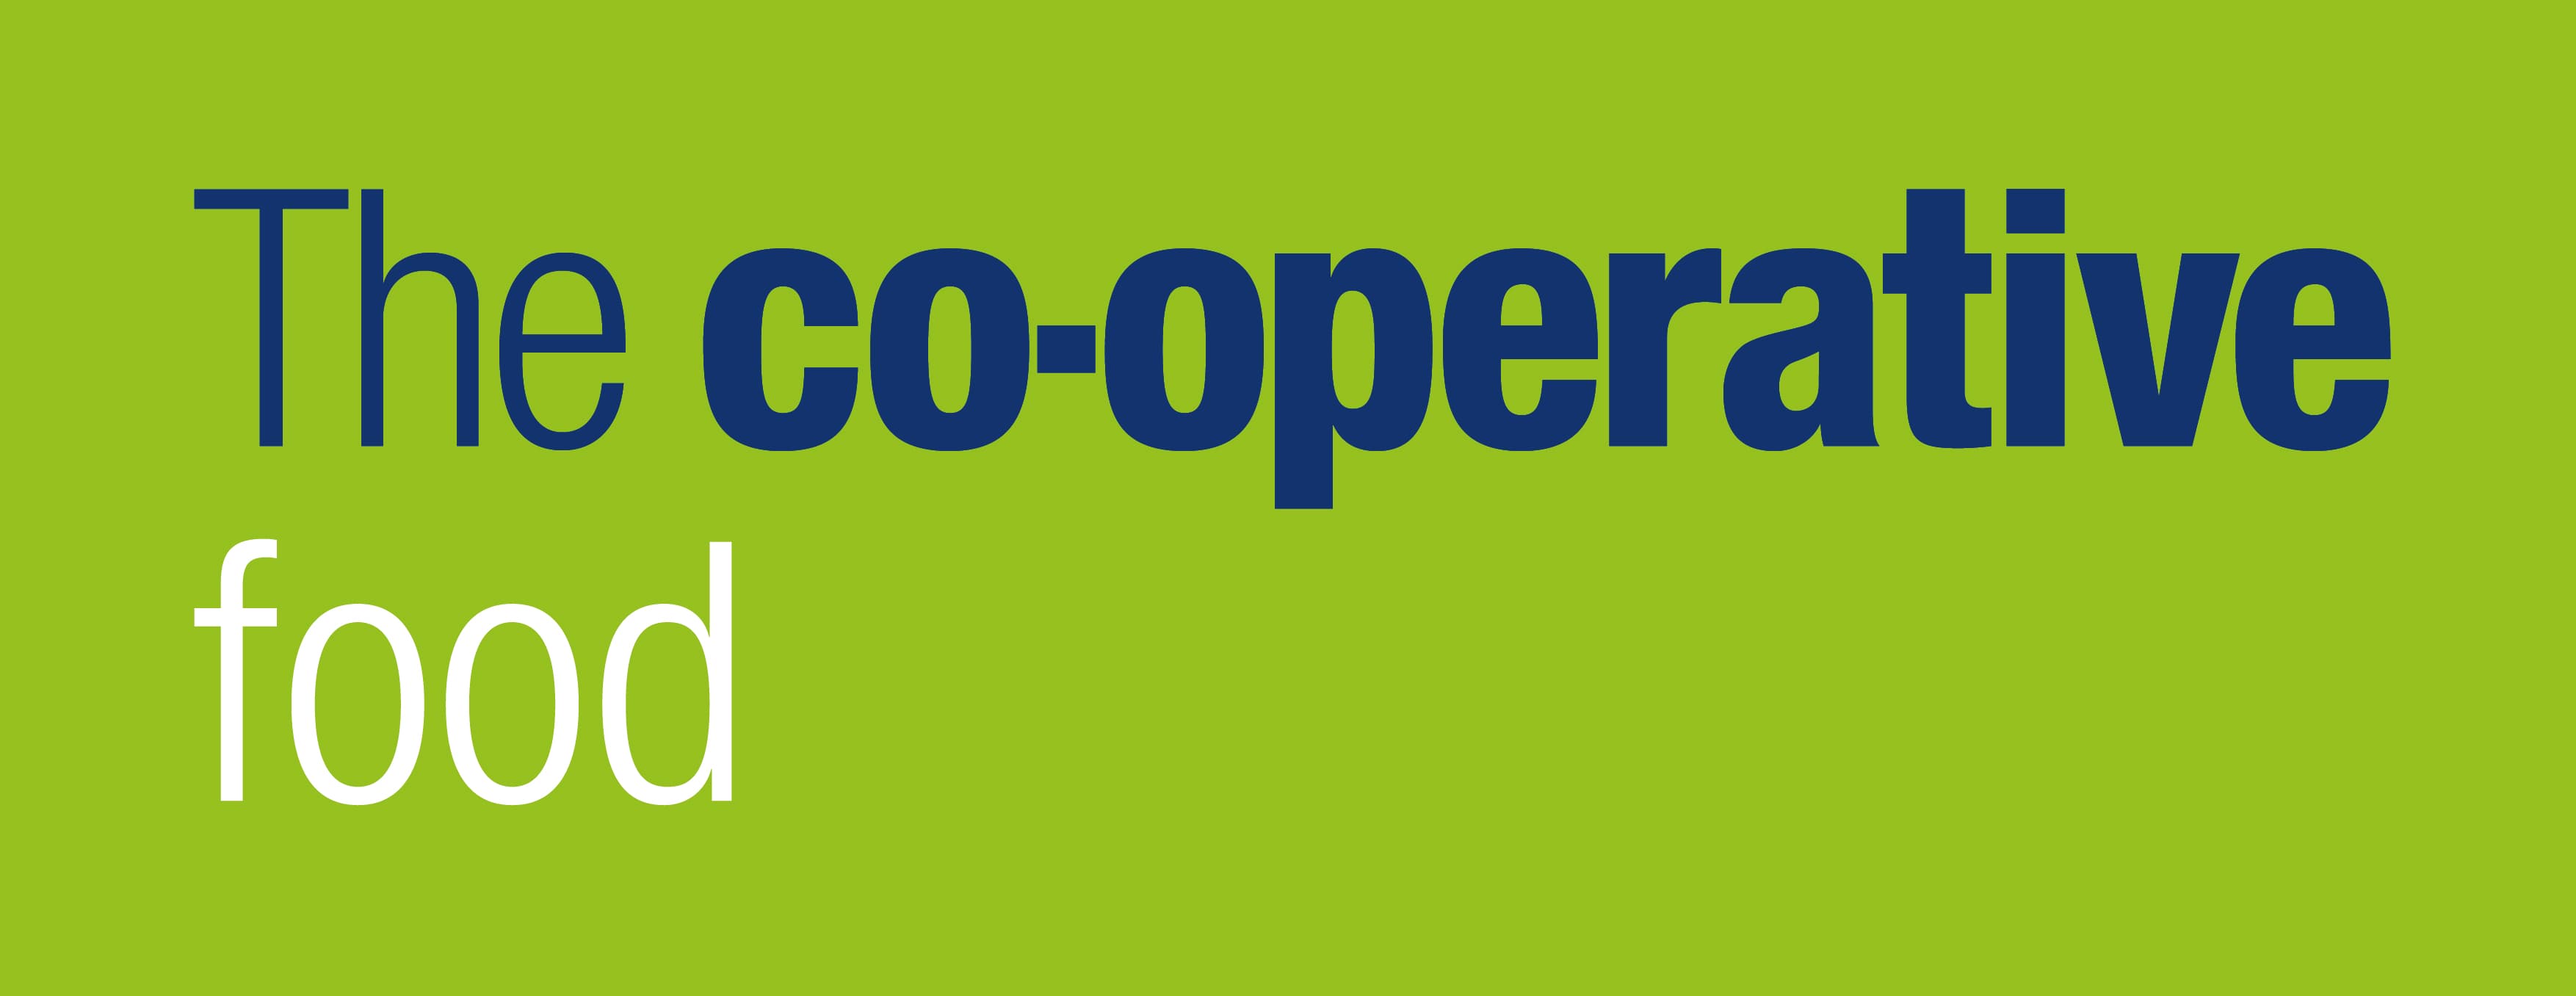 The Co-operative Food (3 High Street, West End)